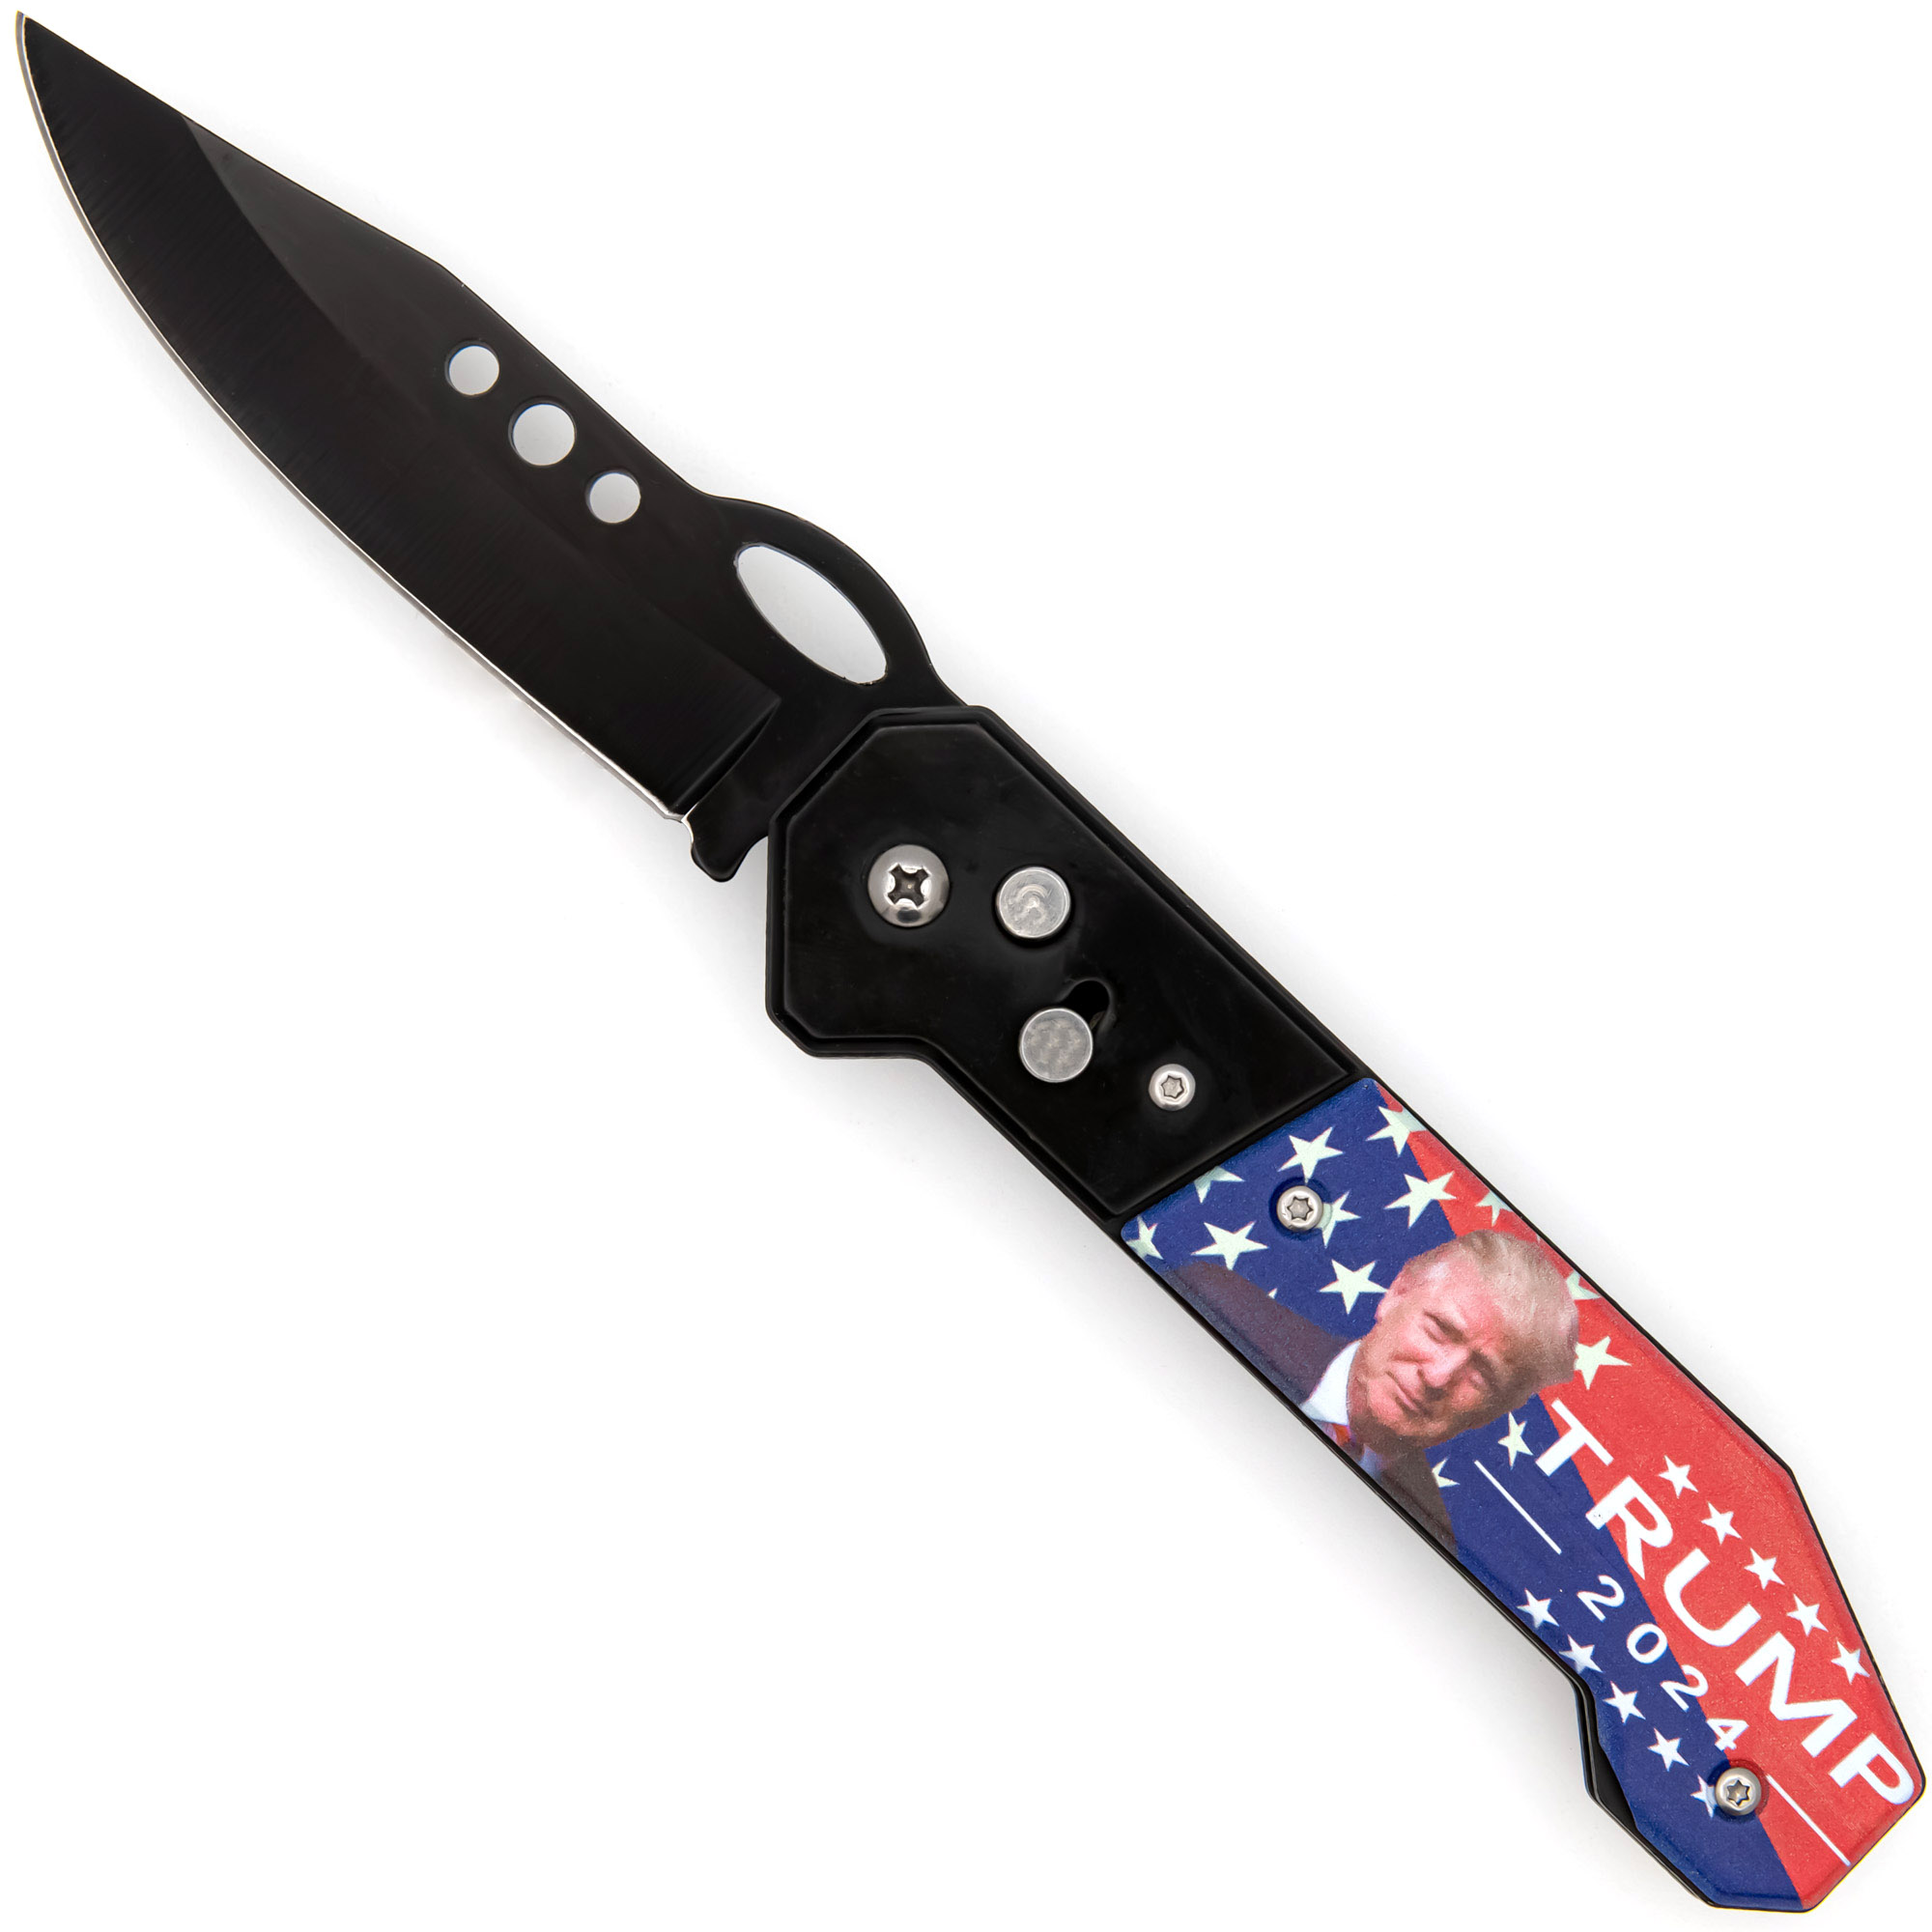 Code of Arms Automatic Push Button SWITCHBLADE Pocket Knife | CSA